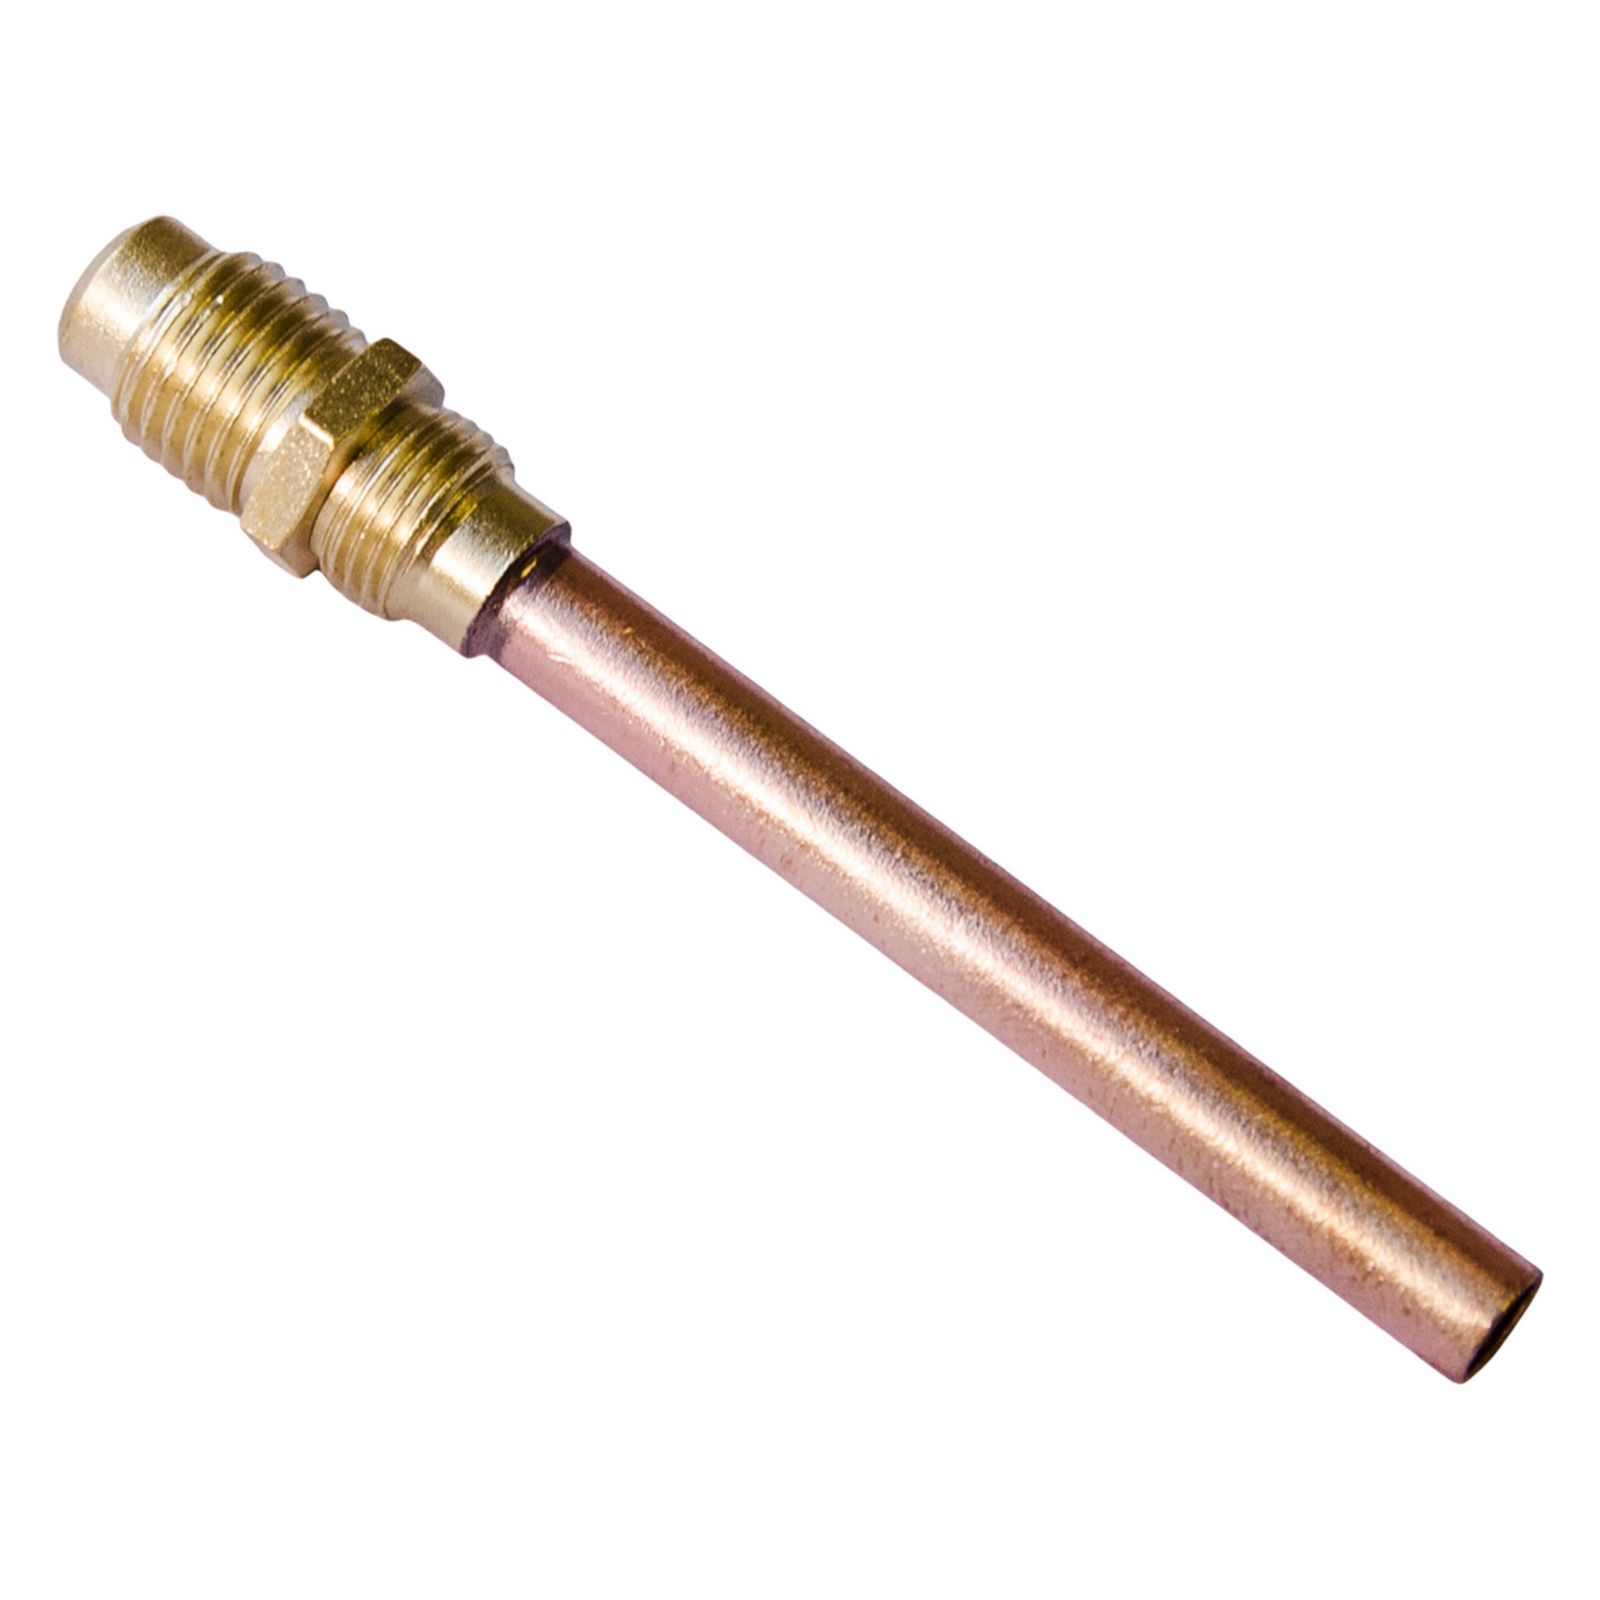 C&D Valve CD3604 - Premium Line Service Valve, Male Flare Access Fitting, 1/4", With Copper Tube Extension, 1/4"